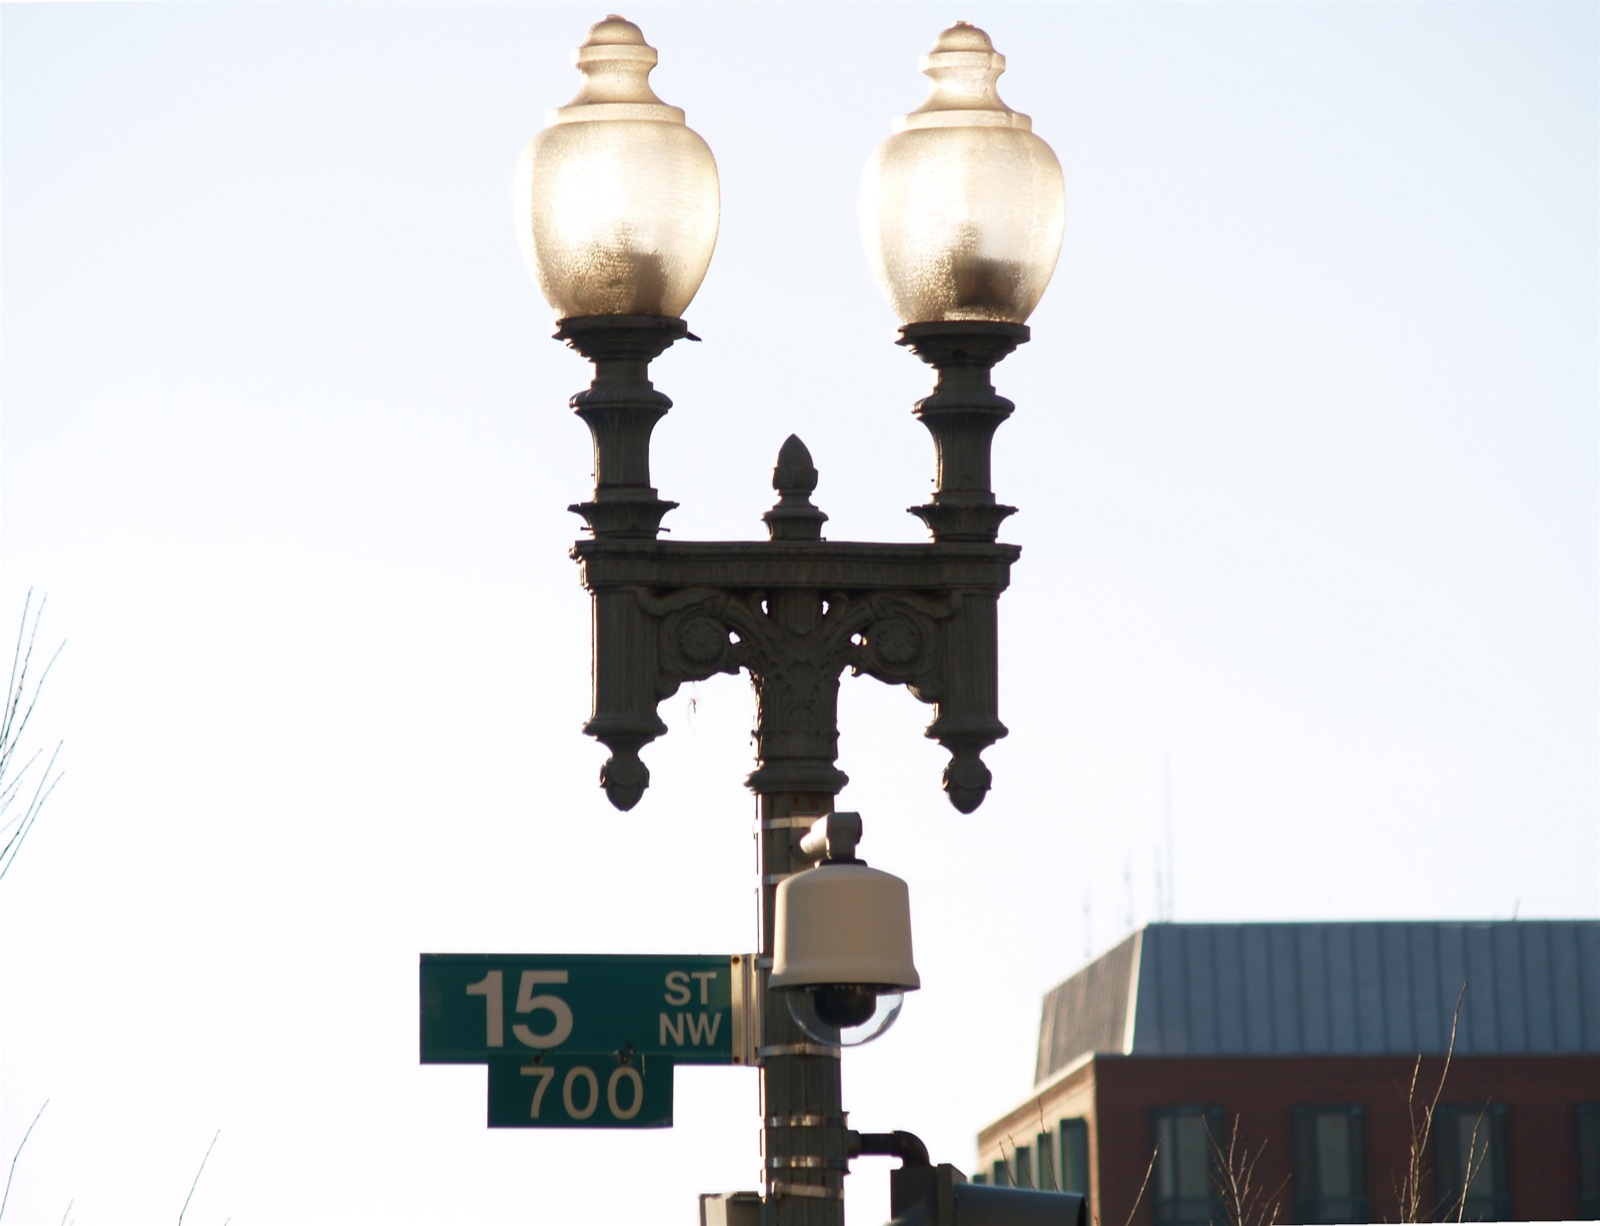 there is a street light and street sign on the corner of street